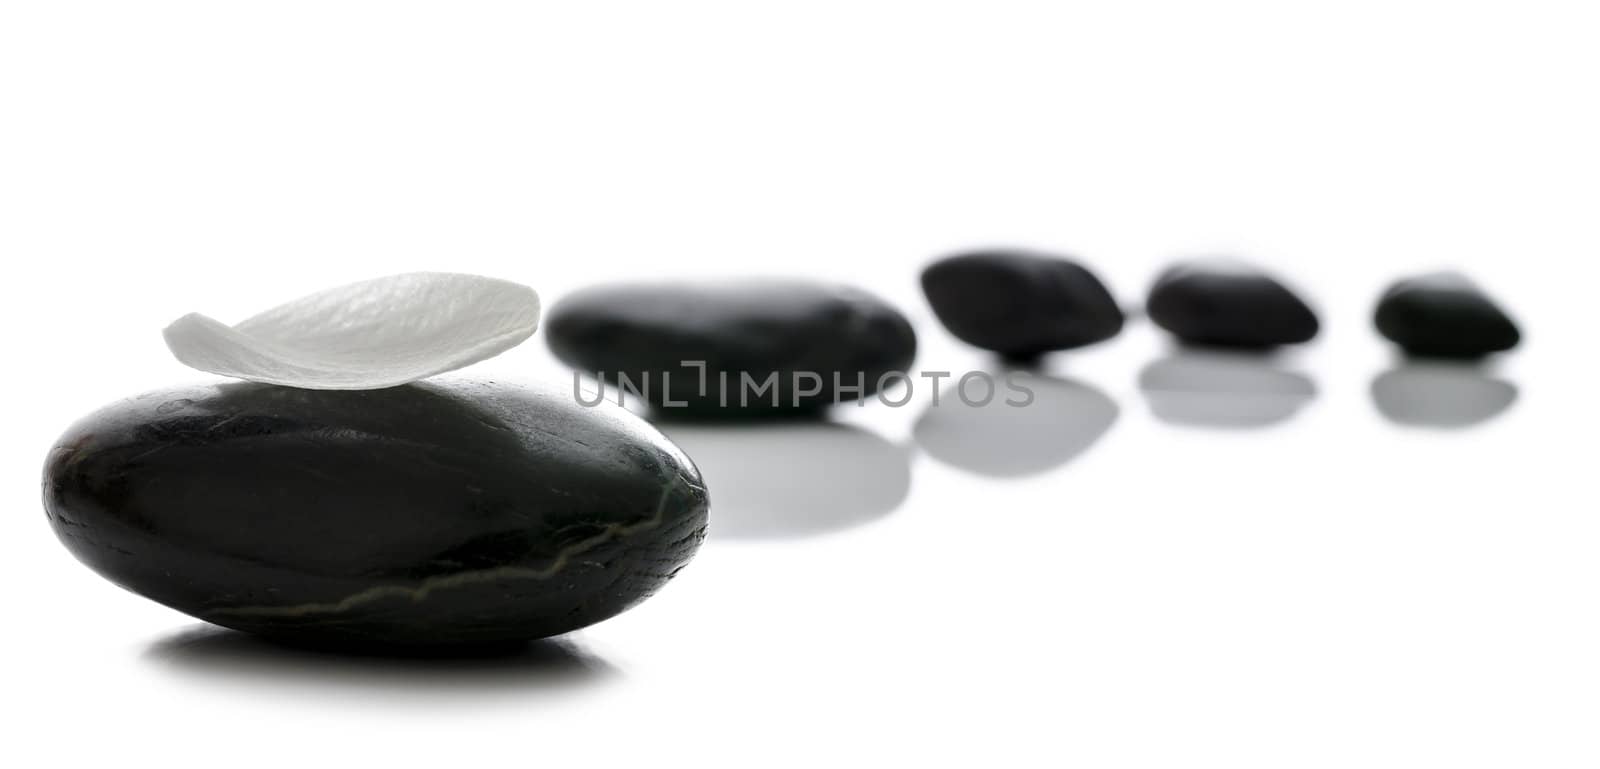 Black spa stones in a row with white petal on the front one.